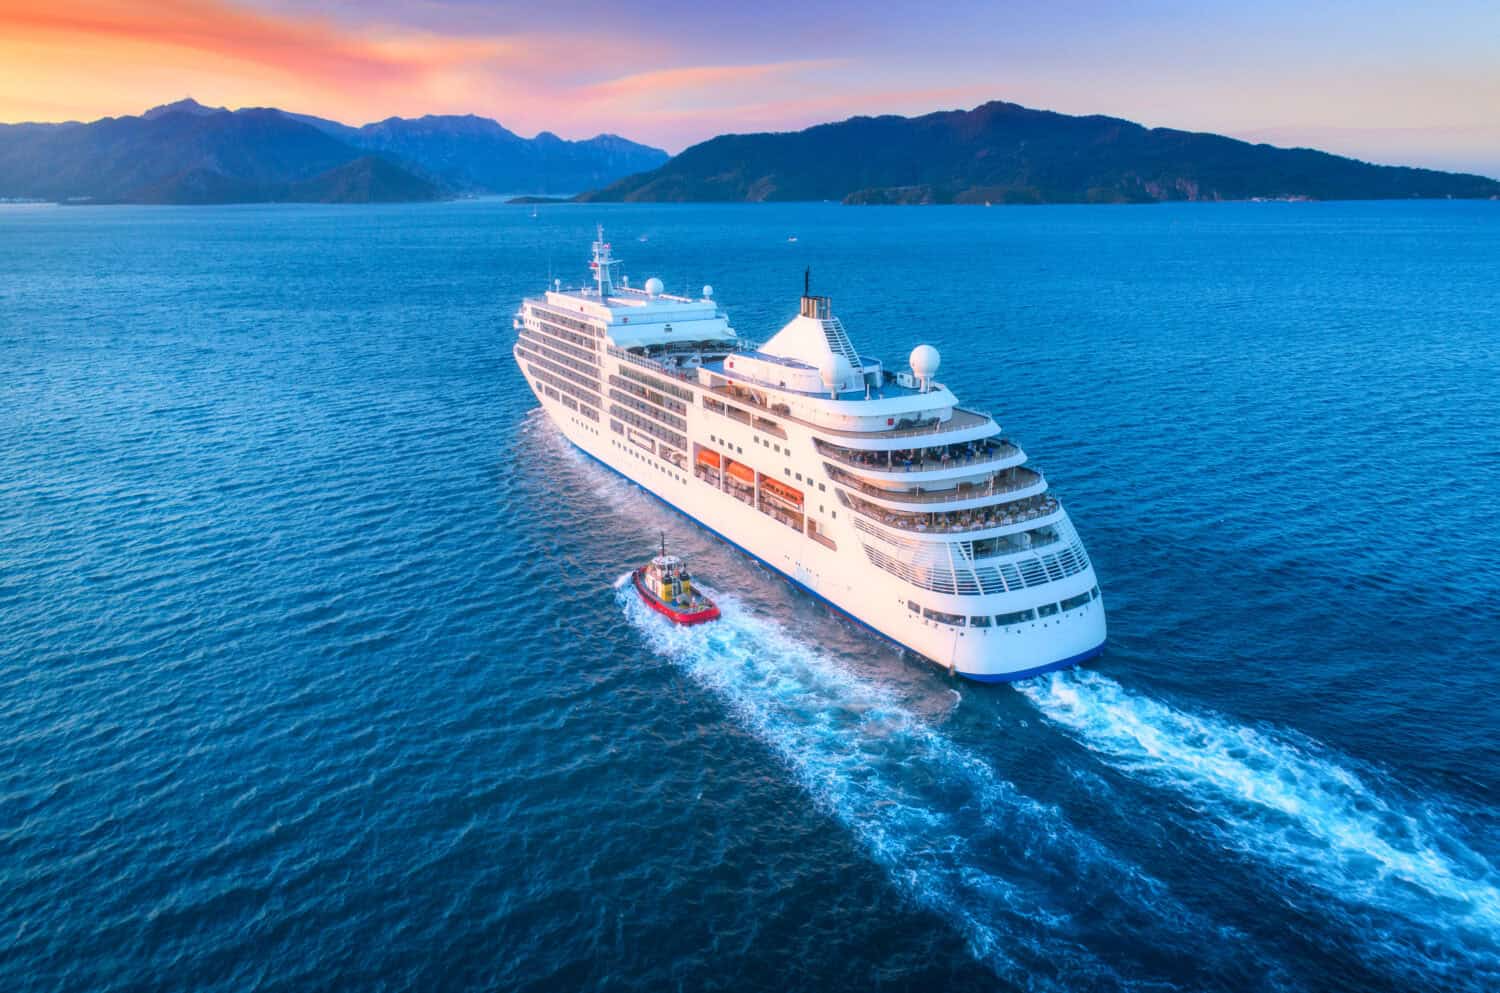 <p>As one of the most popular vacation methods in the world, more than 30 million people cruise every year. This number is even expected to reach over 35 million in 2024 according to <a href="https://www.reuters.com/business/travelers-ready-set-sail-cruises-record-levels-next-year-2023-12-04/#:~:text=About%2035.7%20million%20passengers%20are,Lines%20International%20Association%20(CLIA).&text=The%20one%20thing%20holding%20back,with%20all%20of%20the%20demand." rel="noopener">Reuters</a>. With trips available for hundreds of destinations across all budgets, the cruise line industry has more than bounced back from the COVID-19 pandemic.</p> <p>This is especially true for the rich who are looking at luxury cruising as a once-in-lifetime experience. As cruise ships are often compared to floating cities, many cruise lines have looked to increase the level of luxury you experience on board. Using data from websites like <a href="https://elitetraveler.com/travel/luxury-cruises/the-most-expensive-cruises-in-the-world" rel="noopener">elitetraveler</a>, <a href="http://cruises.com" rel="noopener">cruises.com</a>, <a href="http://thetravel.com" rel="noopener">the travel</a>, and <a href="https://www.cruisecritic.com/articles/the-9-most-expensive-cruises-we-love" rel="noopener">Cruise Critic</a>, we identified the 14 most expensive cruises that you can experience today in ascending order.</p> <div class='fwpPitch'><div> <h2><b>Sponsored: Attention Savvy Investors: Speak to 3 Financial Experts – FREE</b></h2> <p>Ever wanted an extra set of eyes on an investment you’re considering? Now you can speak with up to 3 financial experts in your area for <strong>FREE</strong>. By simply <a href="https://smartasset.com/retirement/find-a-financial-planner?utm_source=247wallst&utm_campaign=wall_savvy&utm_content=desktop|the-14-most-wildly-expensive-cruises-on-earth|1385159&utm_term=Microsoft&utm_medium=eoaCTALinkDefault" rel="noopener nofollow sponsored"> clicking here</a> you can begin to match with financial professionals who can help guide you through the financial decisions you’re making. And the best part? The first conversation with them is free.</p> <p><a href="https://smartasset.com/retirement/find-a-financial-planner?utm_source=247wallst&utm_campaign=wall_savvy&utm_content=desktop|the-14-most-wildly-expensive-cruises-on-earth|1385159&utm_term=Microsoft&utm_medium=eoaCTALinkDefault" rel="noopener nofollow sponsored"> Click here</a> to match with up to 3 financial pros who would be excited to help you make financial decisions.</p>  </div> </div><p>Agree with this? Hit the Thumbs Up button above. Disagree? Let us know in the comments with what you'd change.</p>